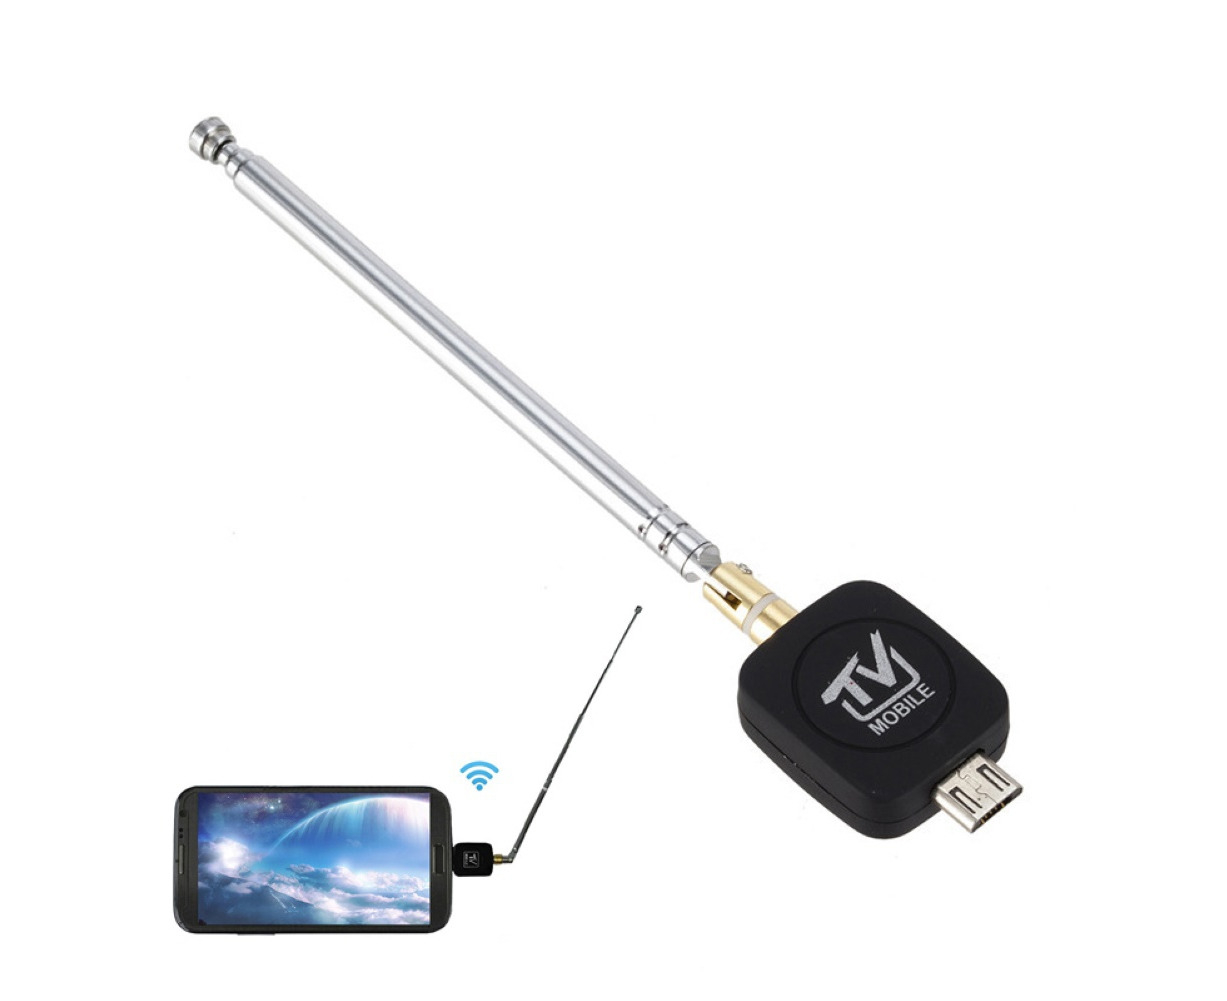 USB Type-C USB TV Tuner for PC Windwos/Android Smart Phone Tablets 